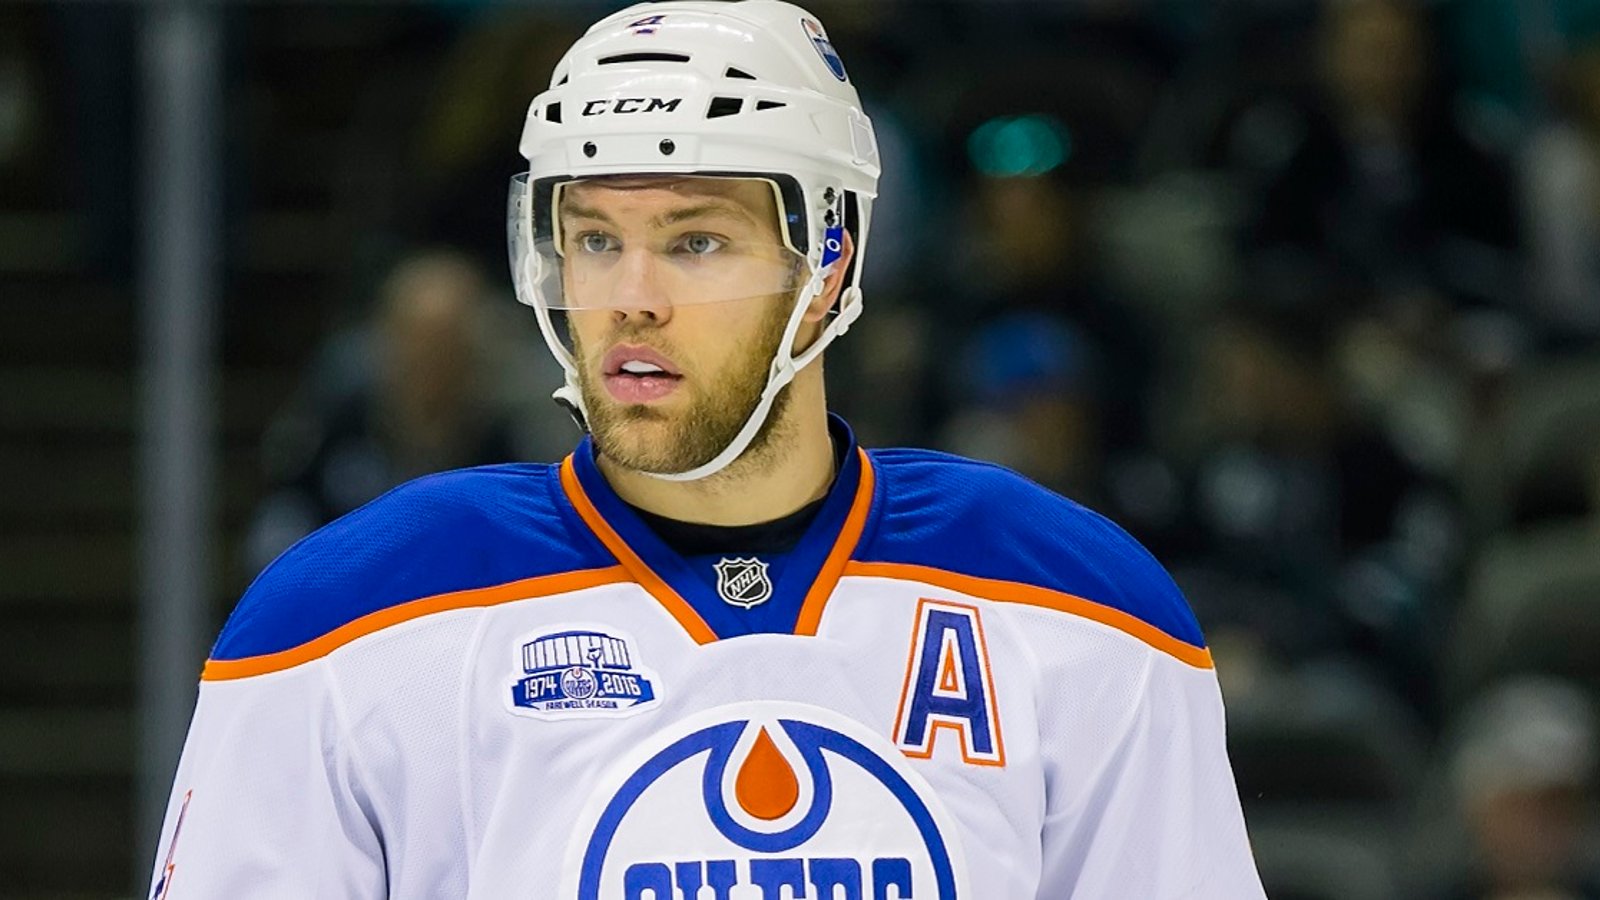 Breaking: Former Oiler Taylor Hall comments on controversy in Edmonton.